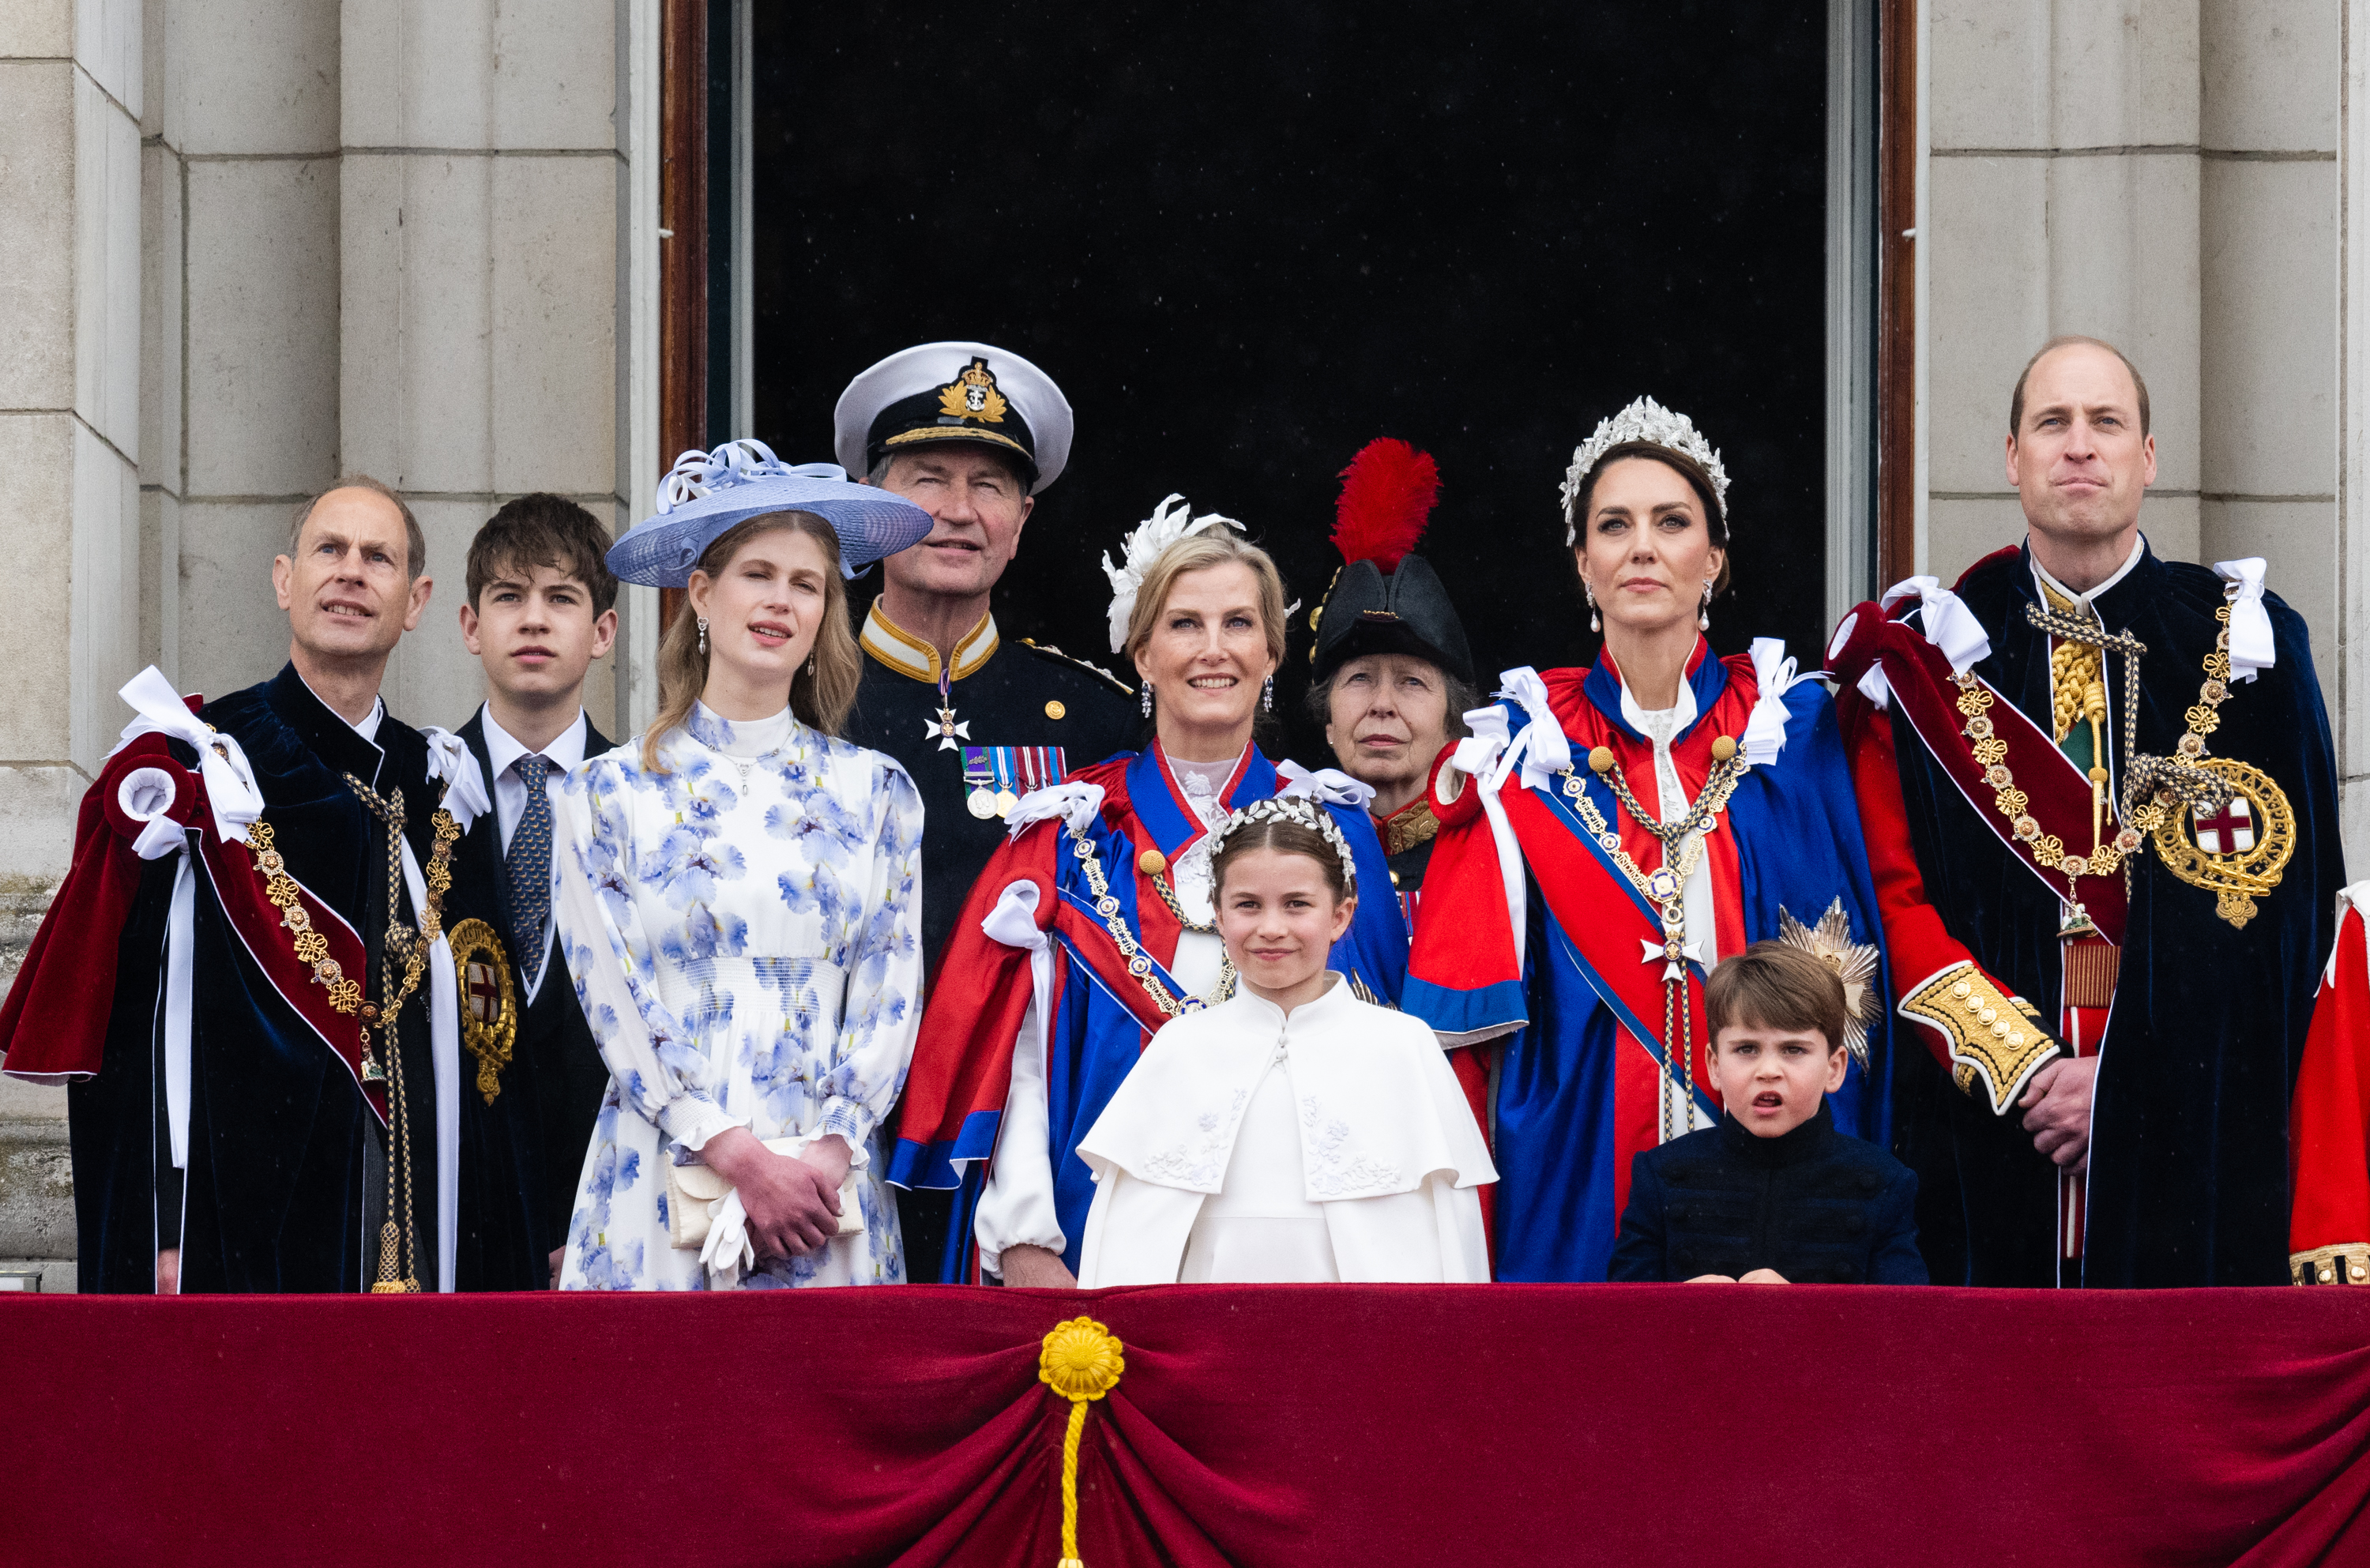 Prince Edward, Lady Louise Windsor, Vice Admiral Sir Timothy Laurence, Sophie, Duchess of Edinburgh, Princess Charlotte, Princess Anne, Princess Catherine, Prince Louis, and Prince William attend the Coronation of King Charles III and Queen Camilla in London on May 6, 2023. | Source: Getty Images